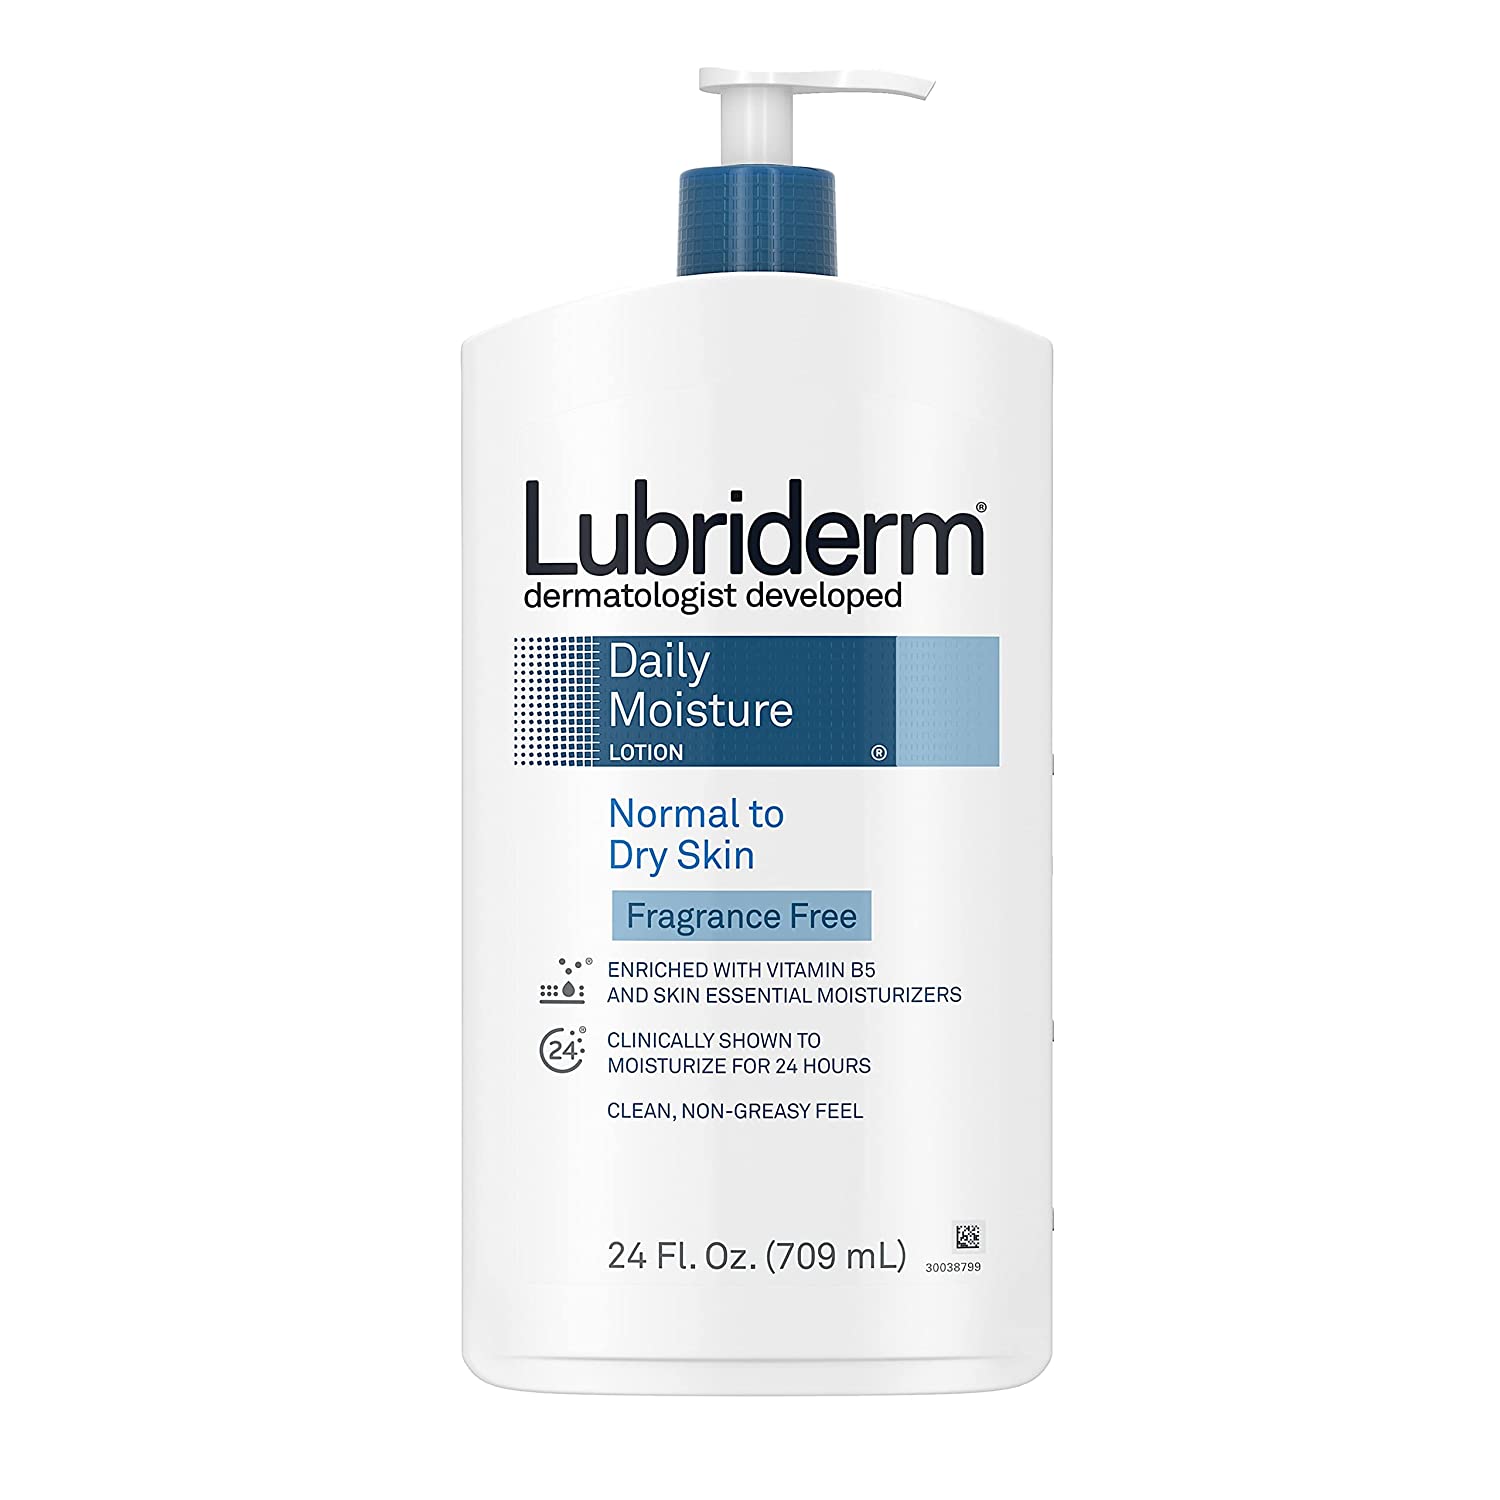 Lubriderm Daily Moisture Hydrating Unscented Body Lotion with Pro Vitamin B5 for Normal to Dry Skin Fragrance Free